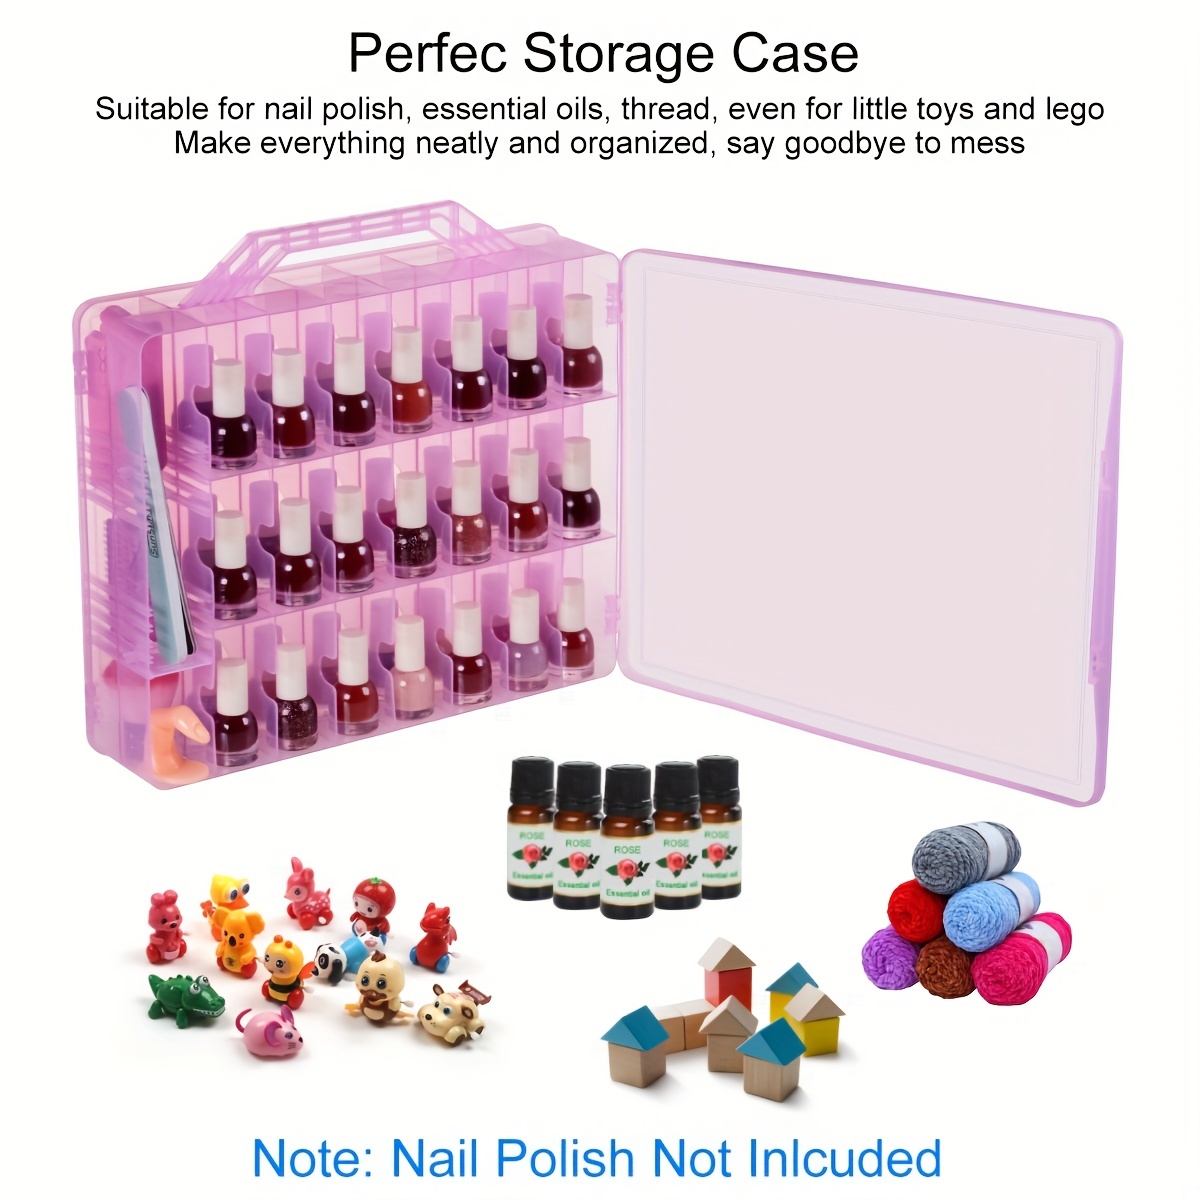 New Portable Clear Double Side Nail Polish Organizer Holder 48 Bottle